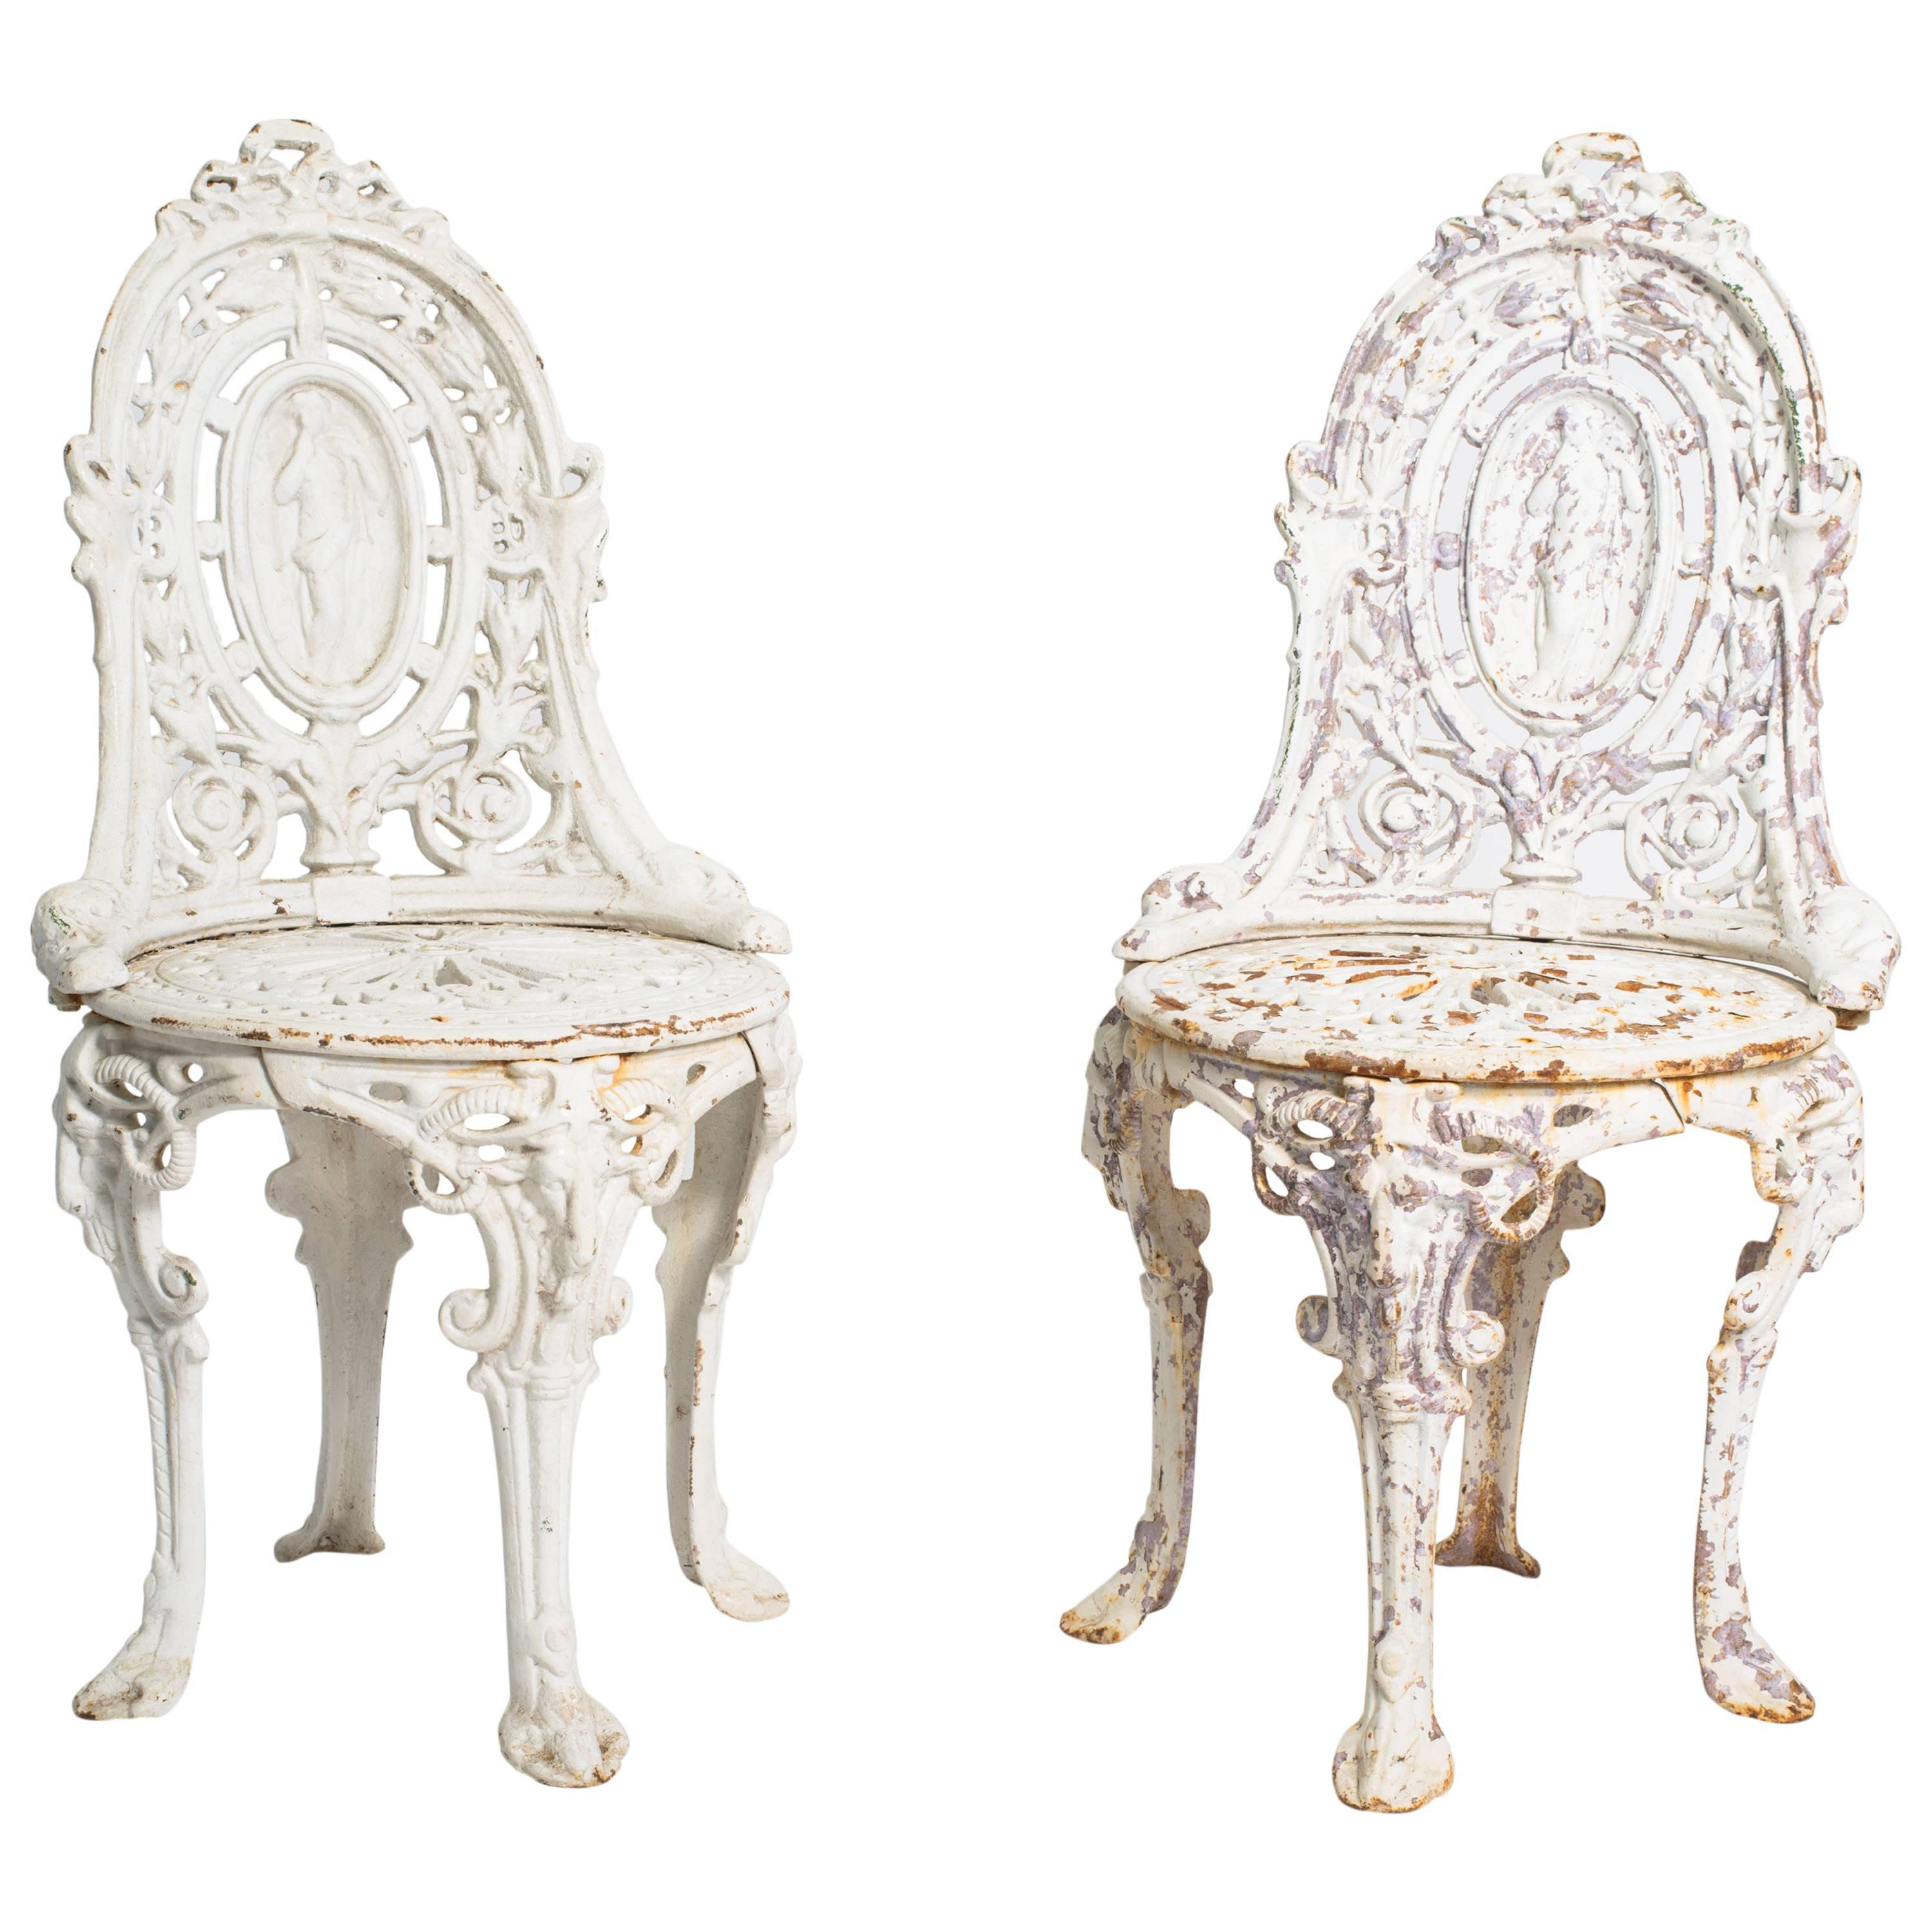 Early 20th Century English Garden Chairs